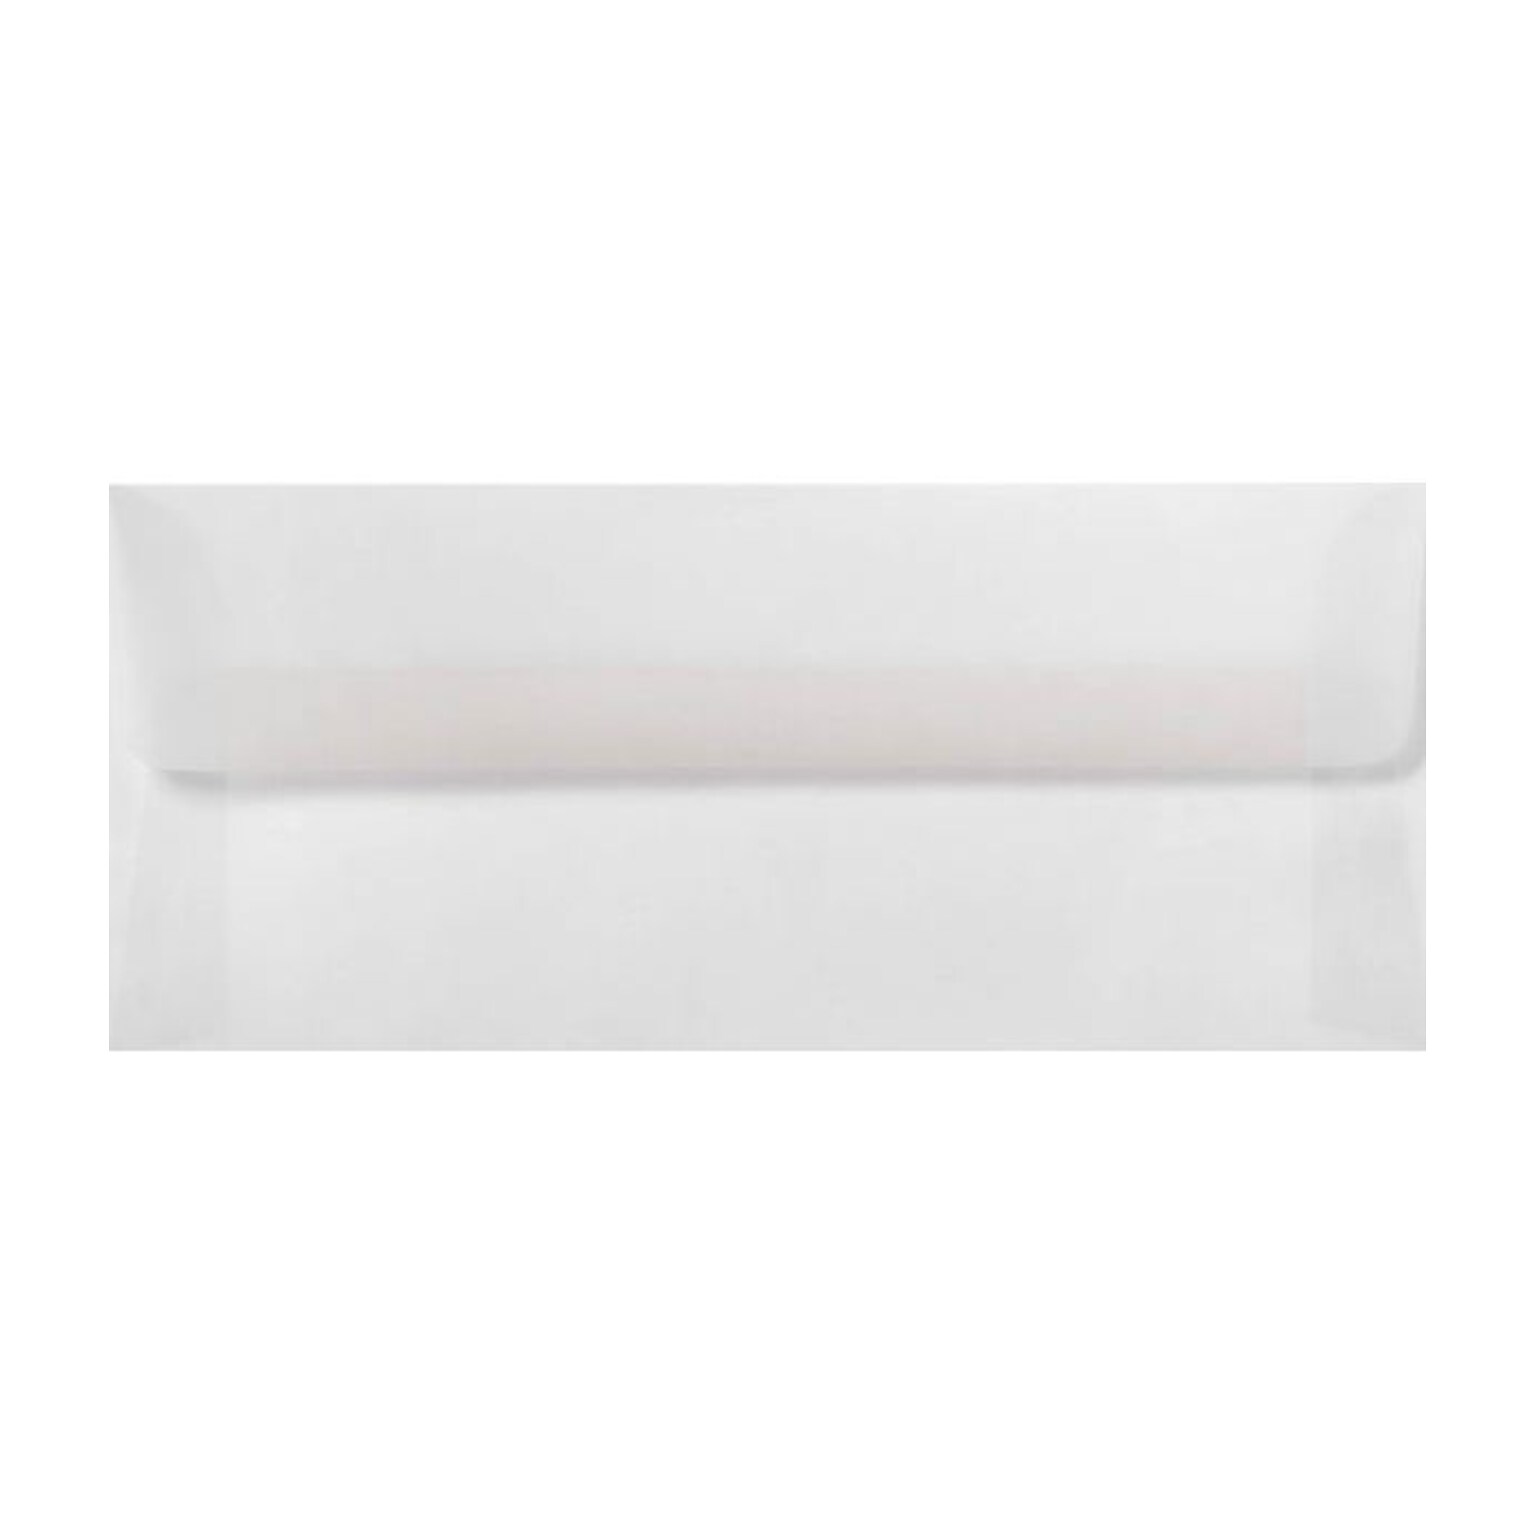 LUX Square Flap Self Seal #10 Business Envelope, 4 1/2 x 9 1/2, Clear Translucent, 1000/Box (4860-00-1000)